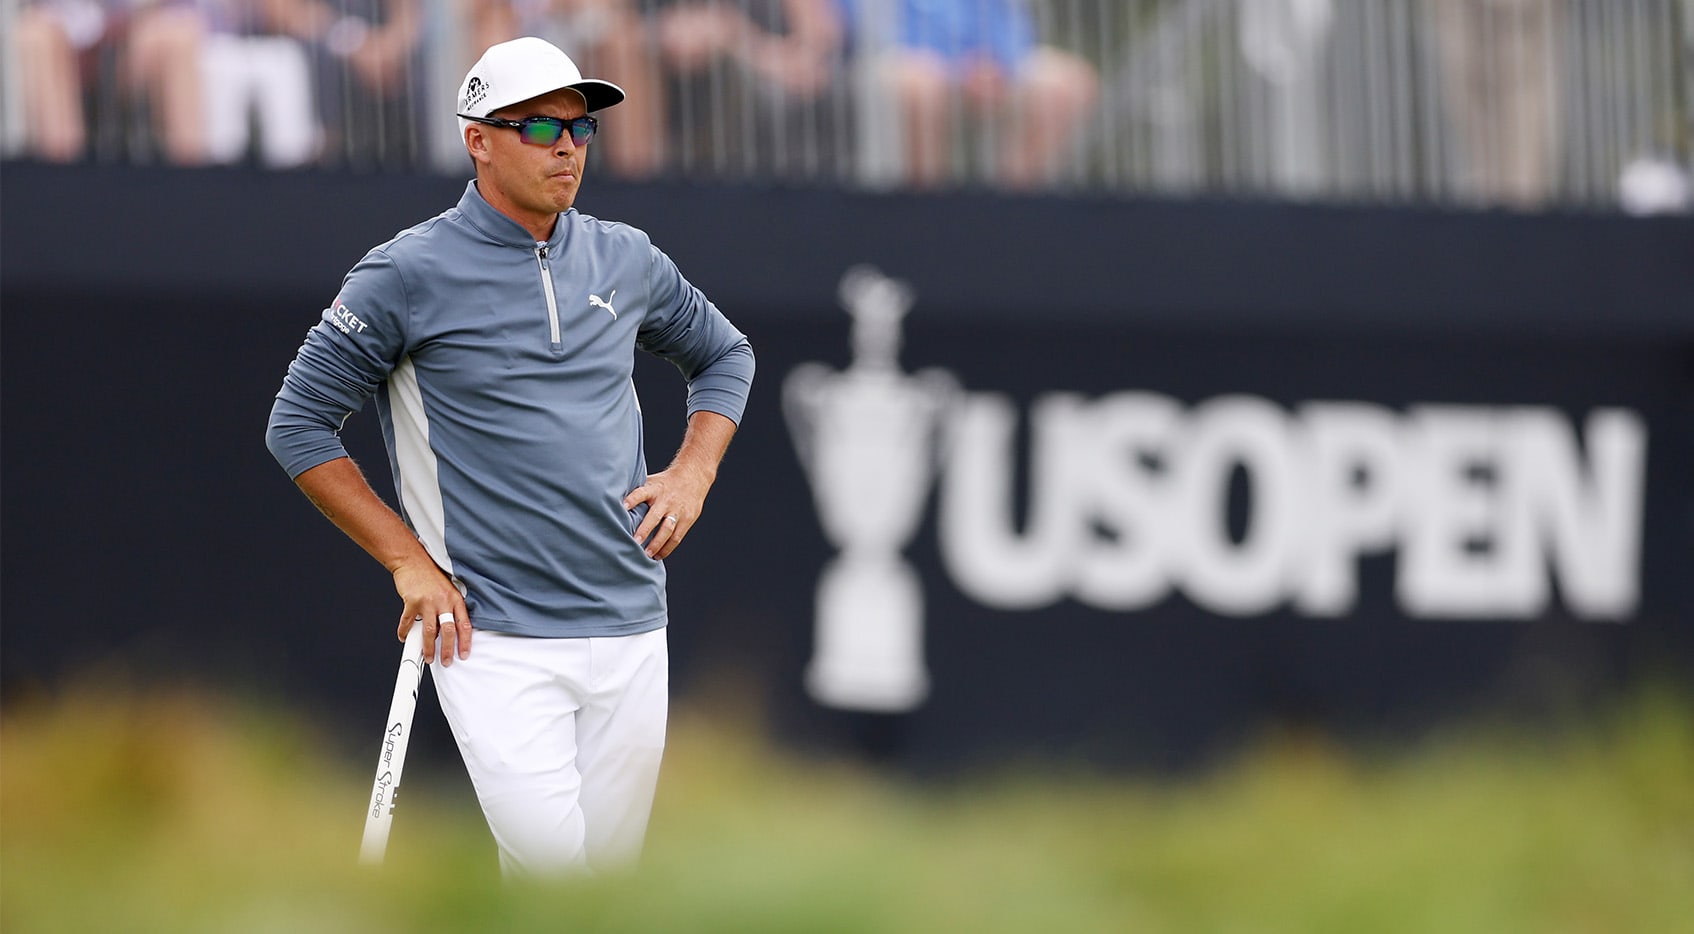 Rickie Fowler returns to his roots to shoot 62 in U.S